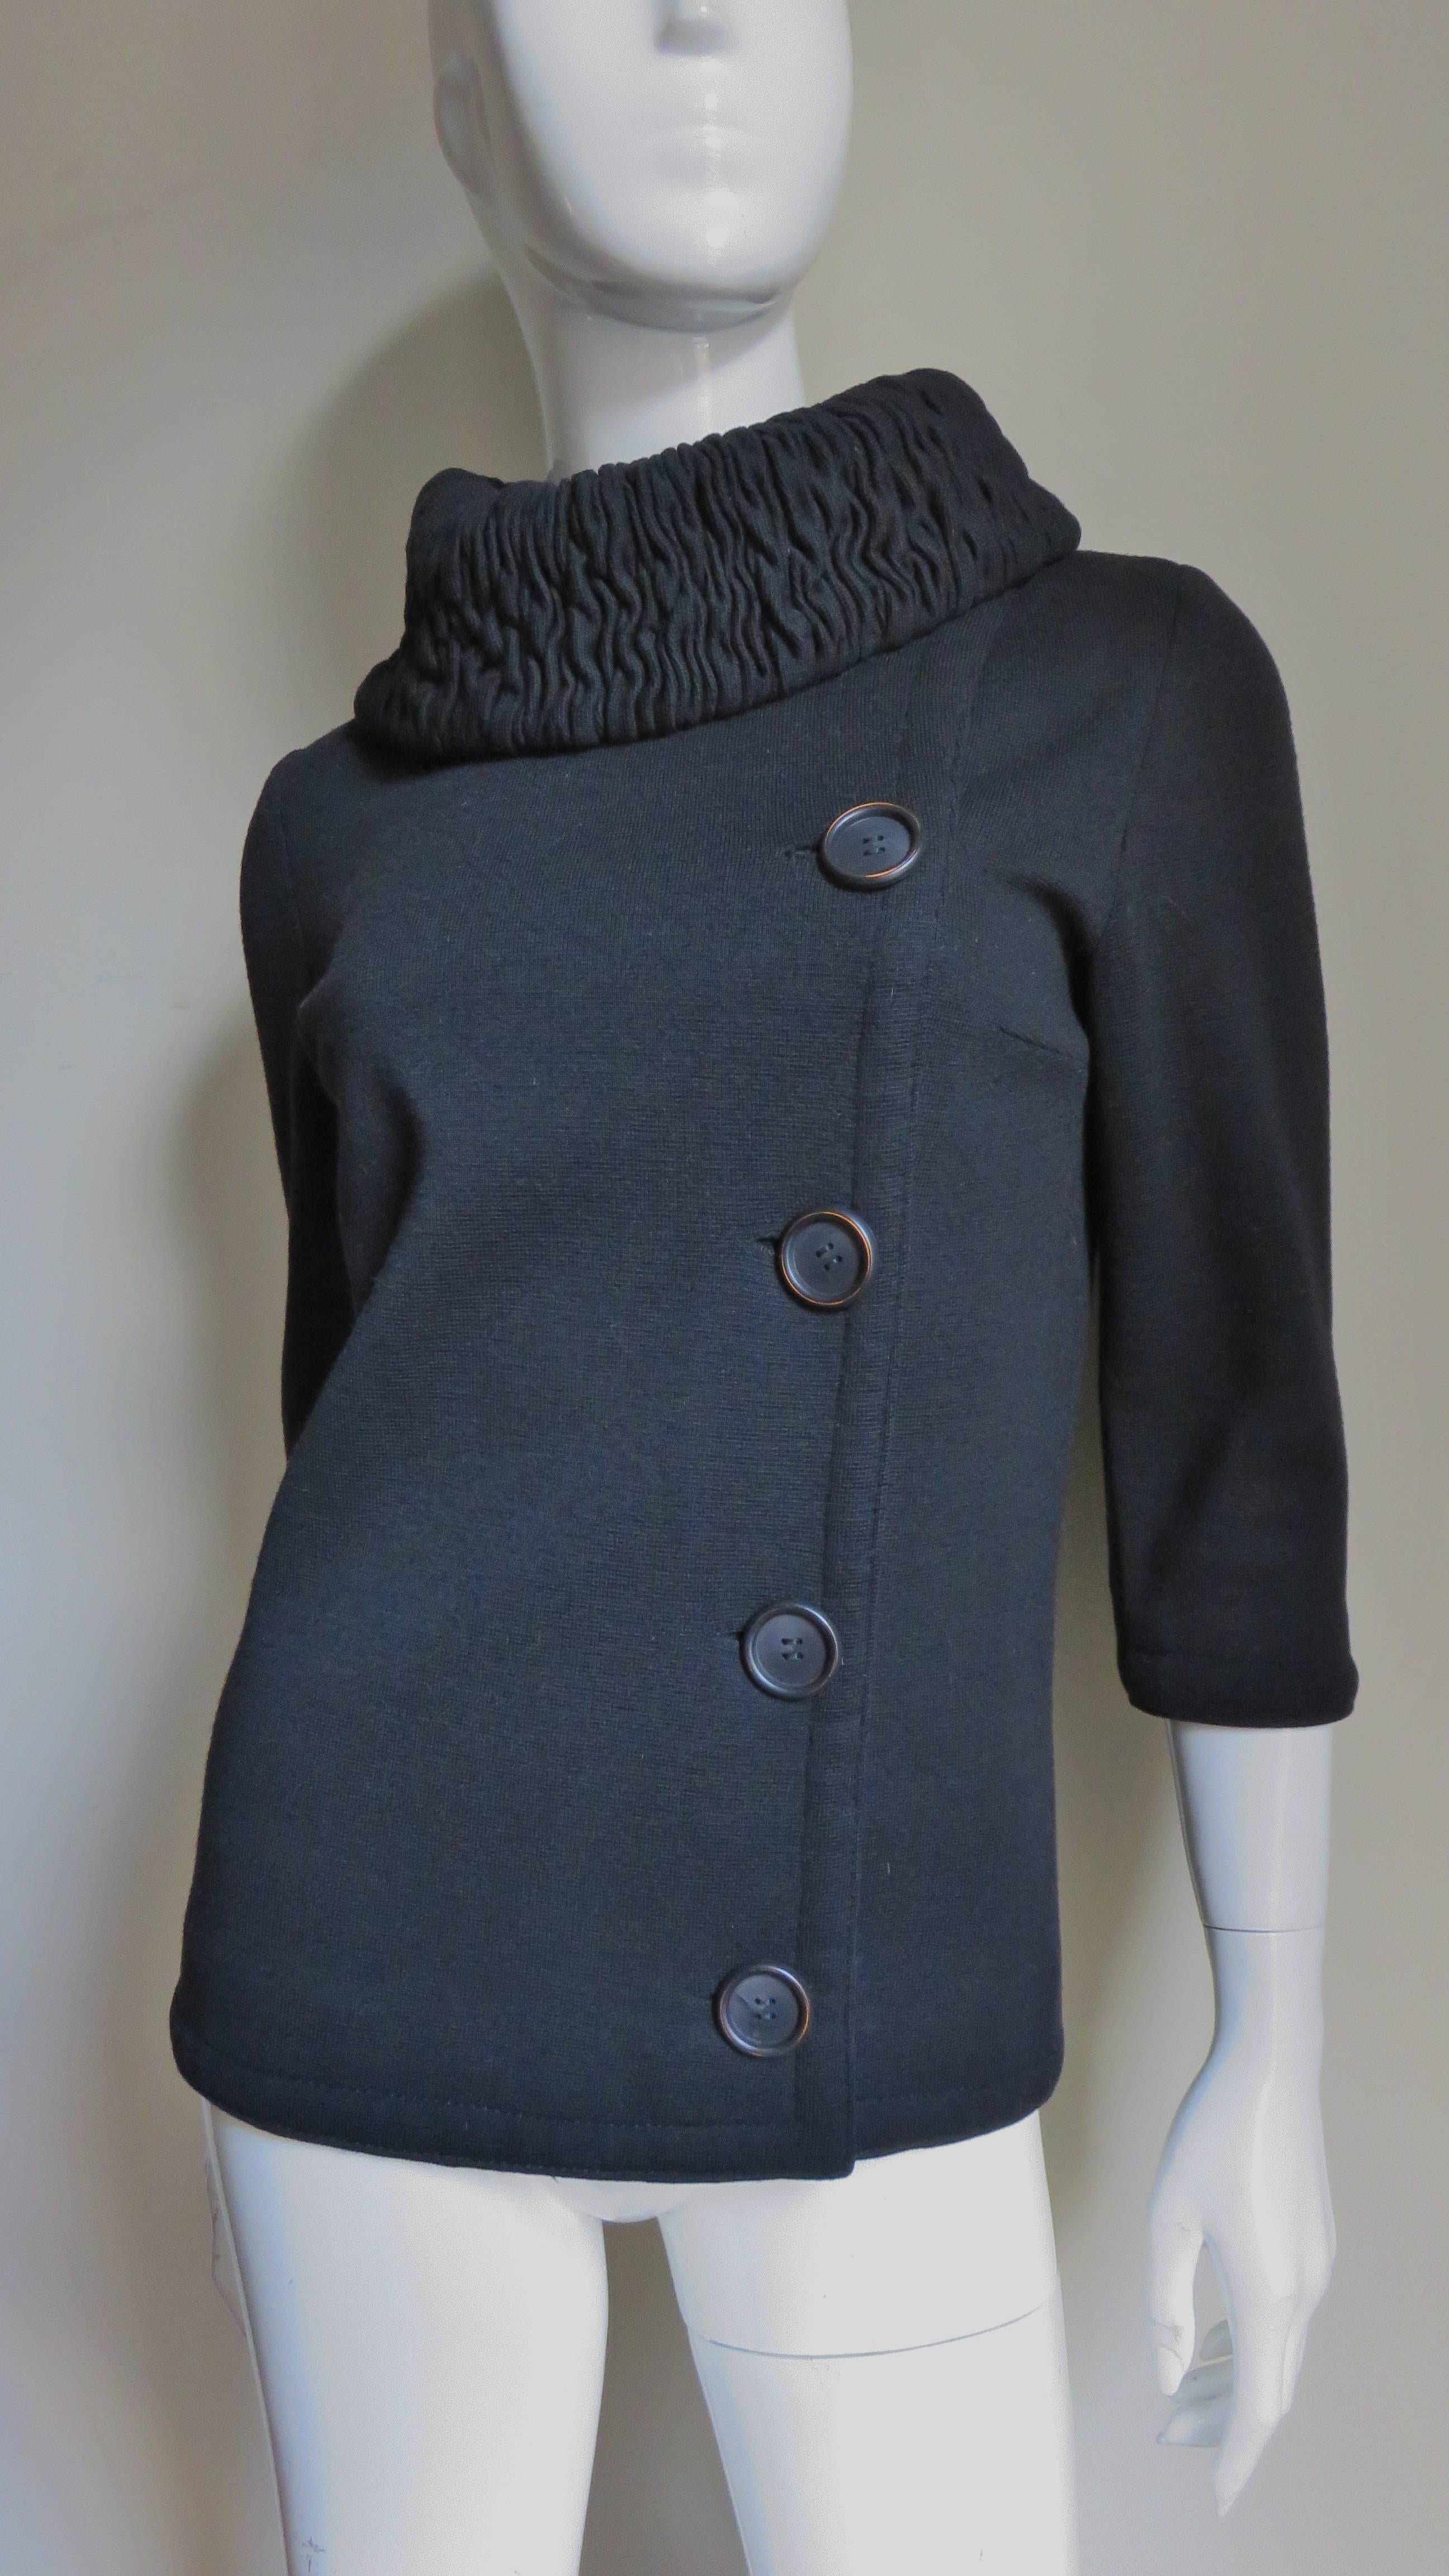 A great black wool knit jacket by Gino Paoli.  It buttons asymmetrically off center front closing with large round black buttons and has 3/4 length sleeves.  The collar folds over and is comprised of detailed rows of ruching closing at the side neck